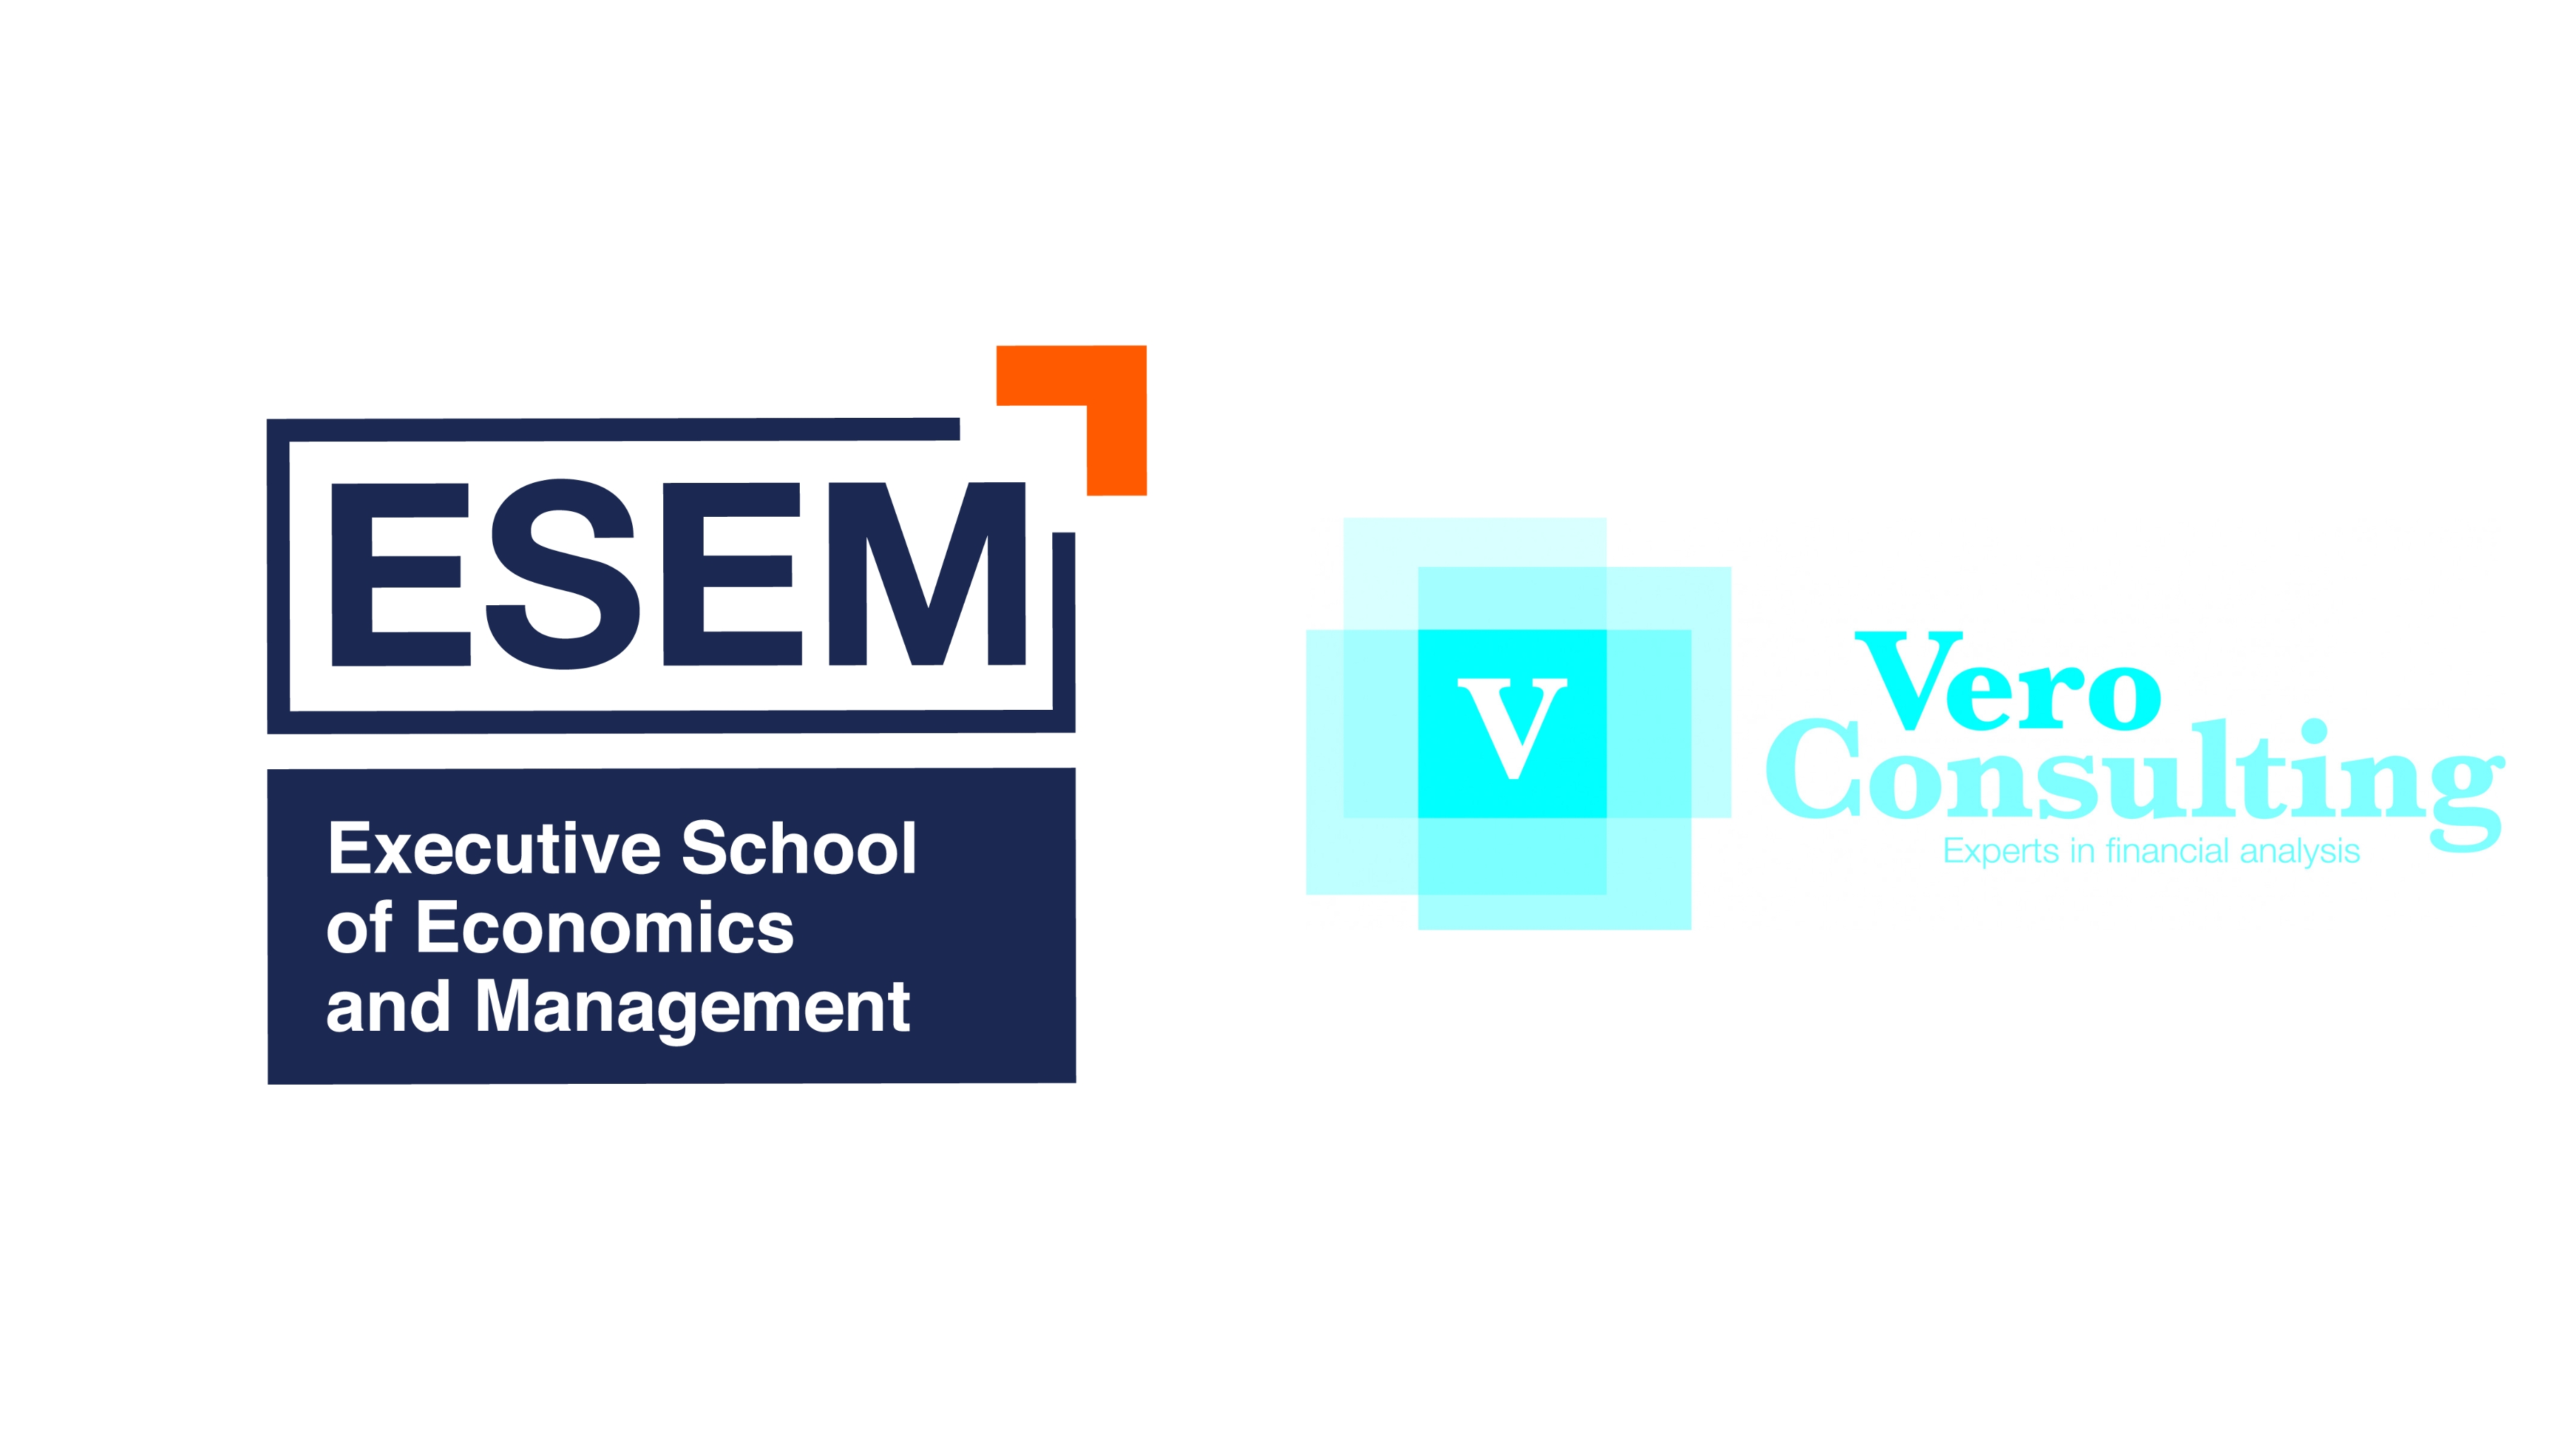 New Members Vero Consulting and ESEM